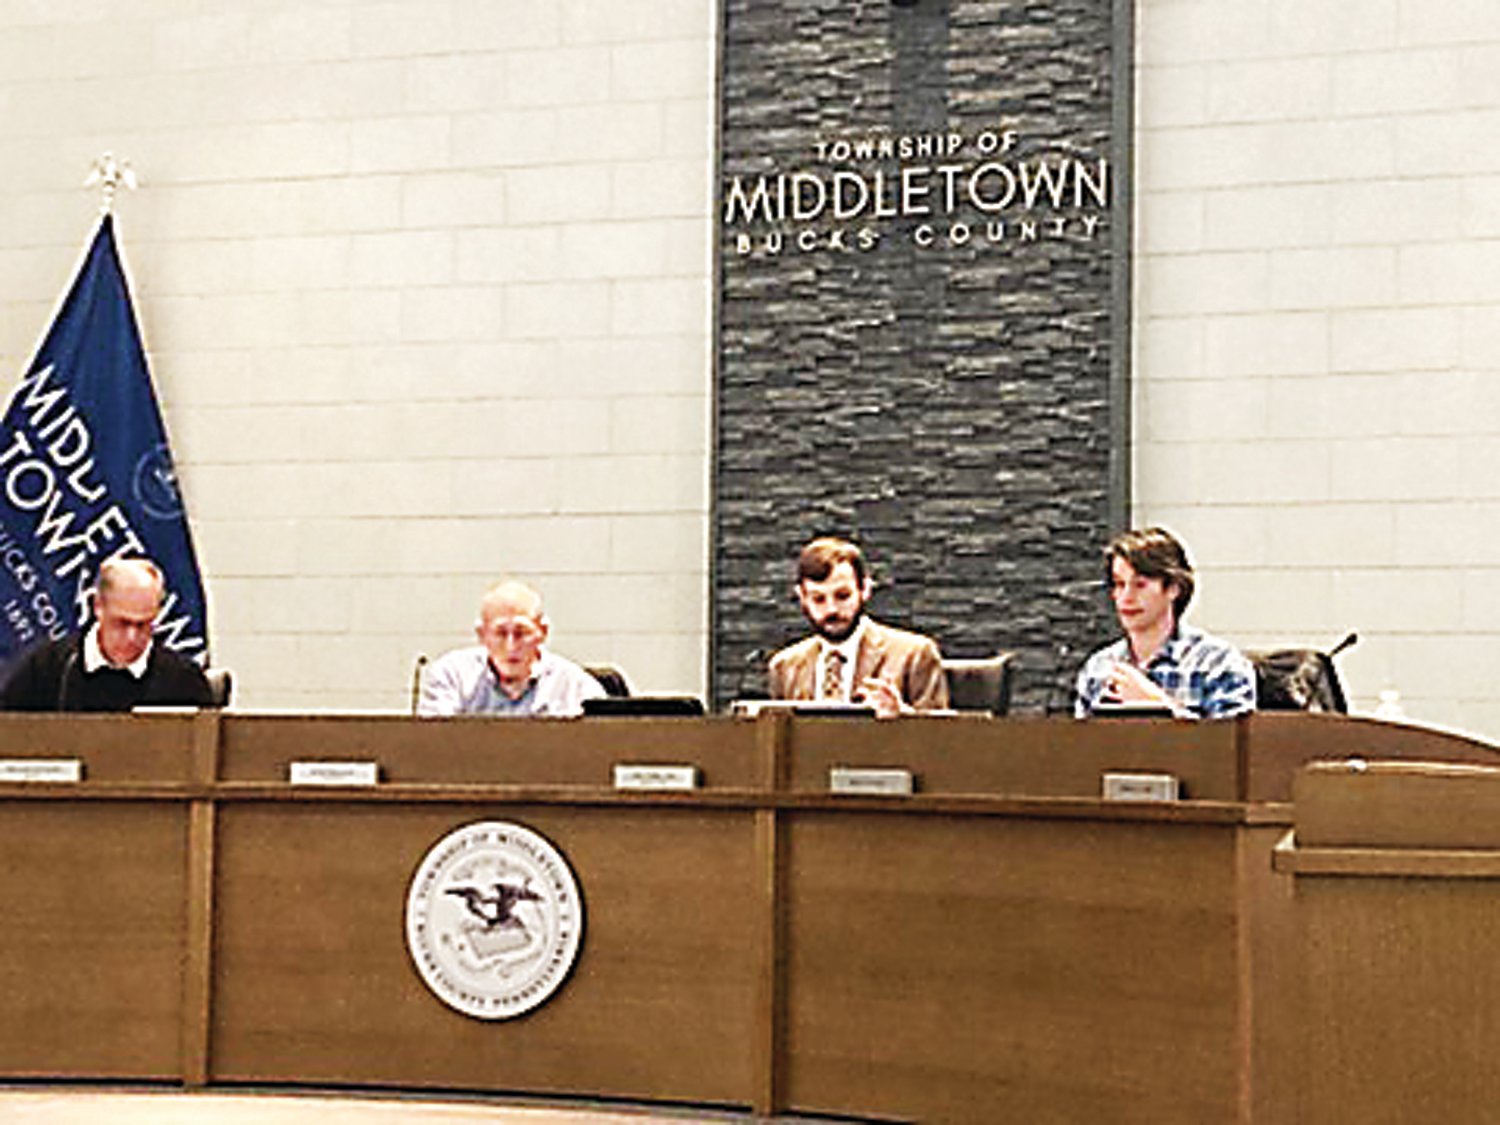 Middletown’s Zoning Hearing Board approved variances for a 72-unit addition to the 84-unit Orchard Square Apartments at its Wednesday night meeting.